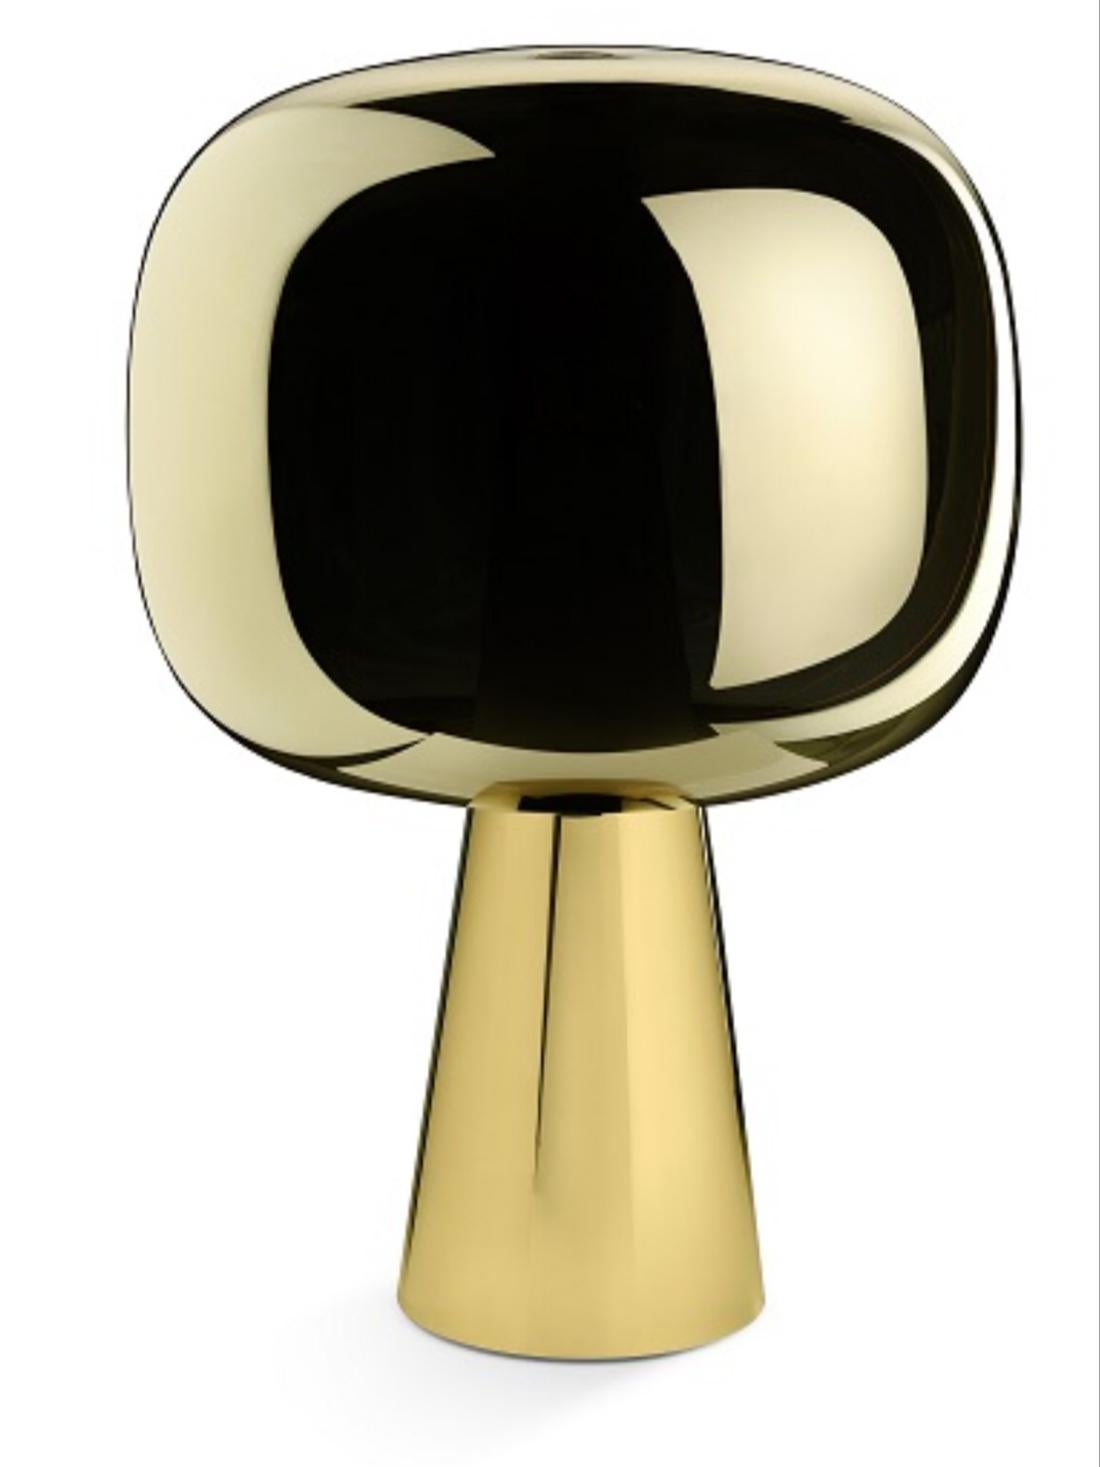 This beautiful Ghidini 1961 table lamp is designed by the Californian Branch Creative and it is the result of the meeting between the higher Italian quality manufacturing in brass and the iconic international design.
The light transforms from what